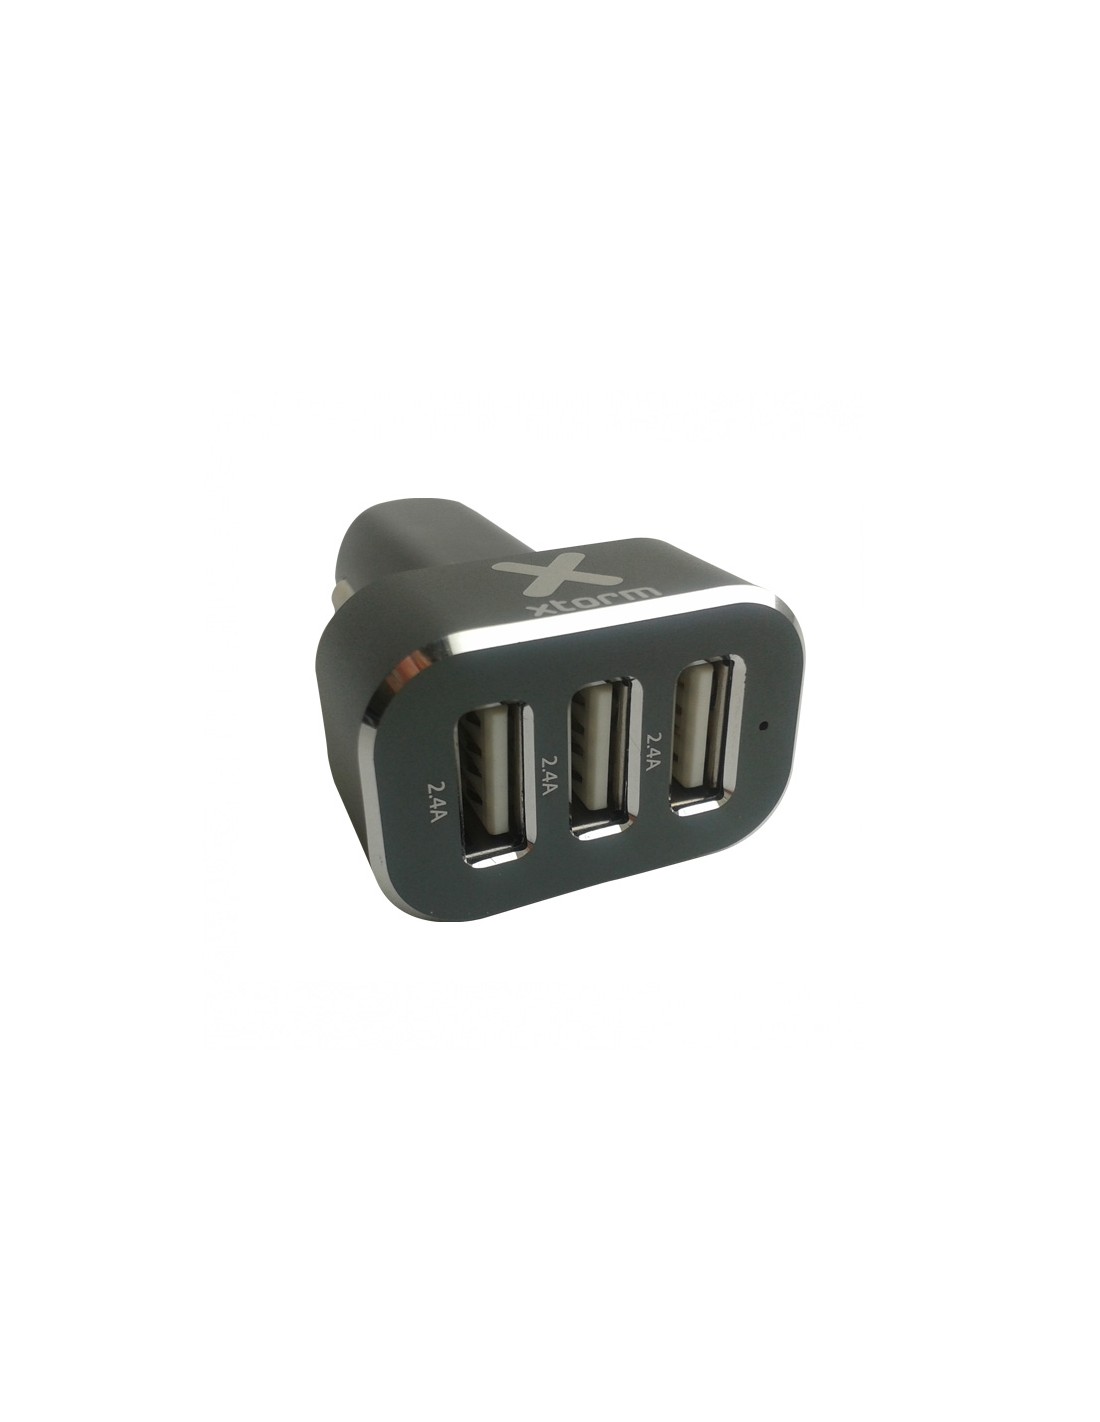 Chargeur Allume-cigare 3 x USB pour iPhone/iPad